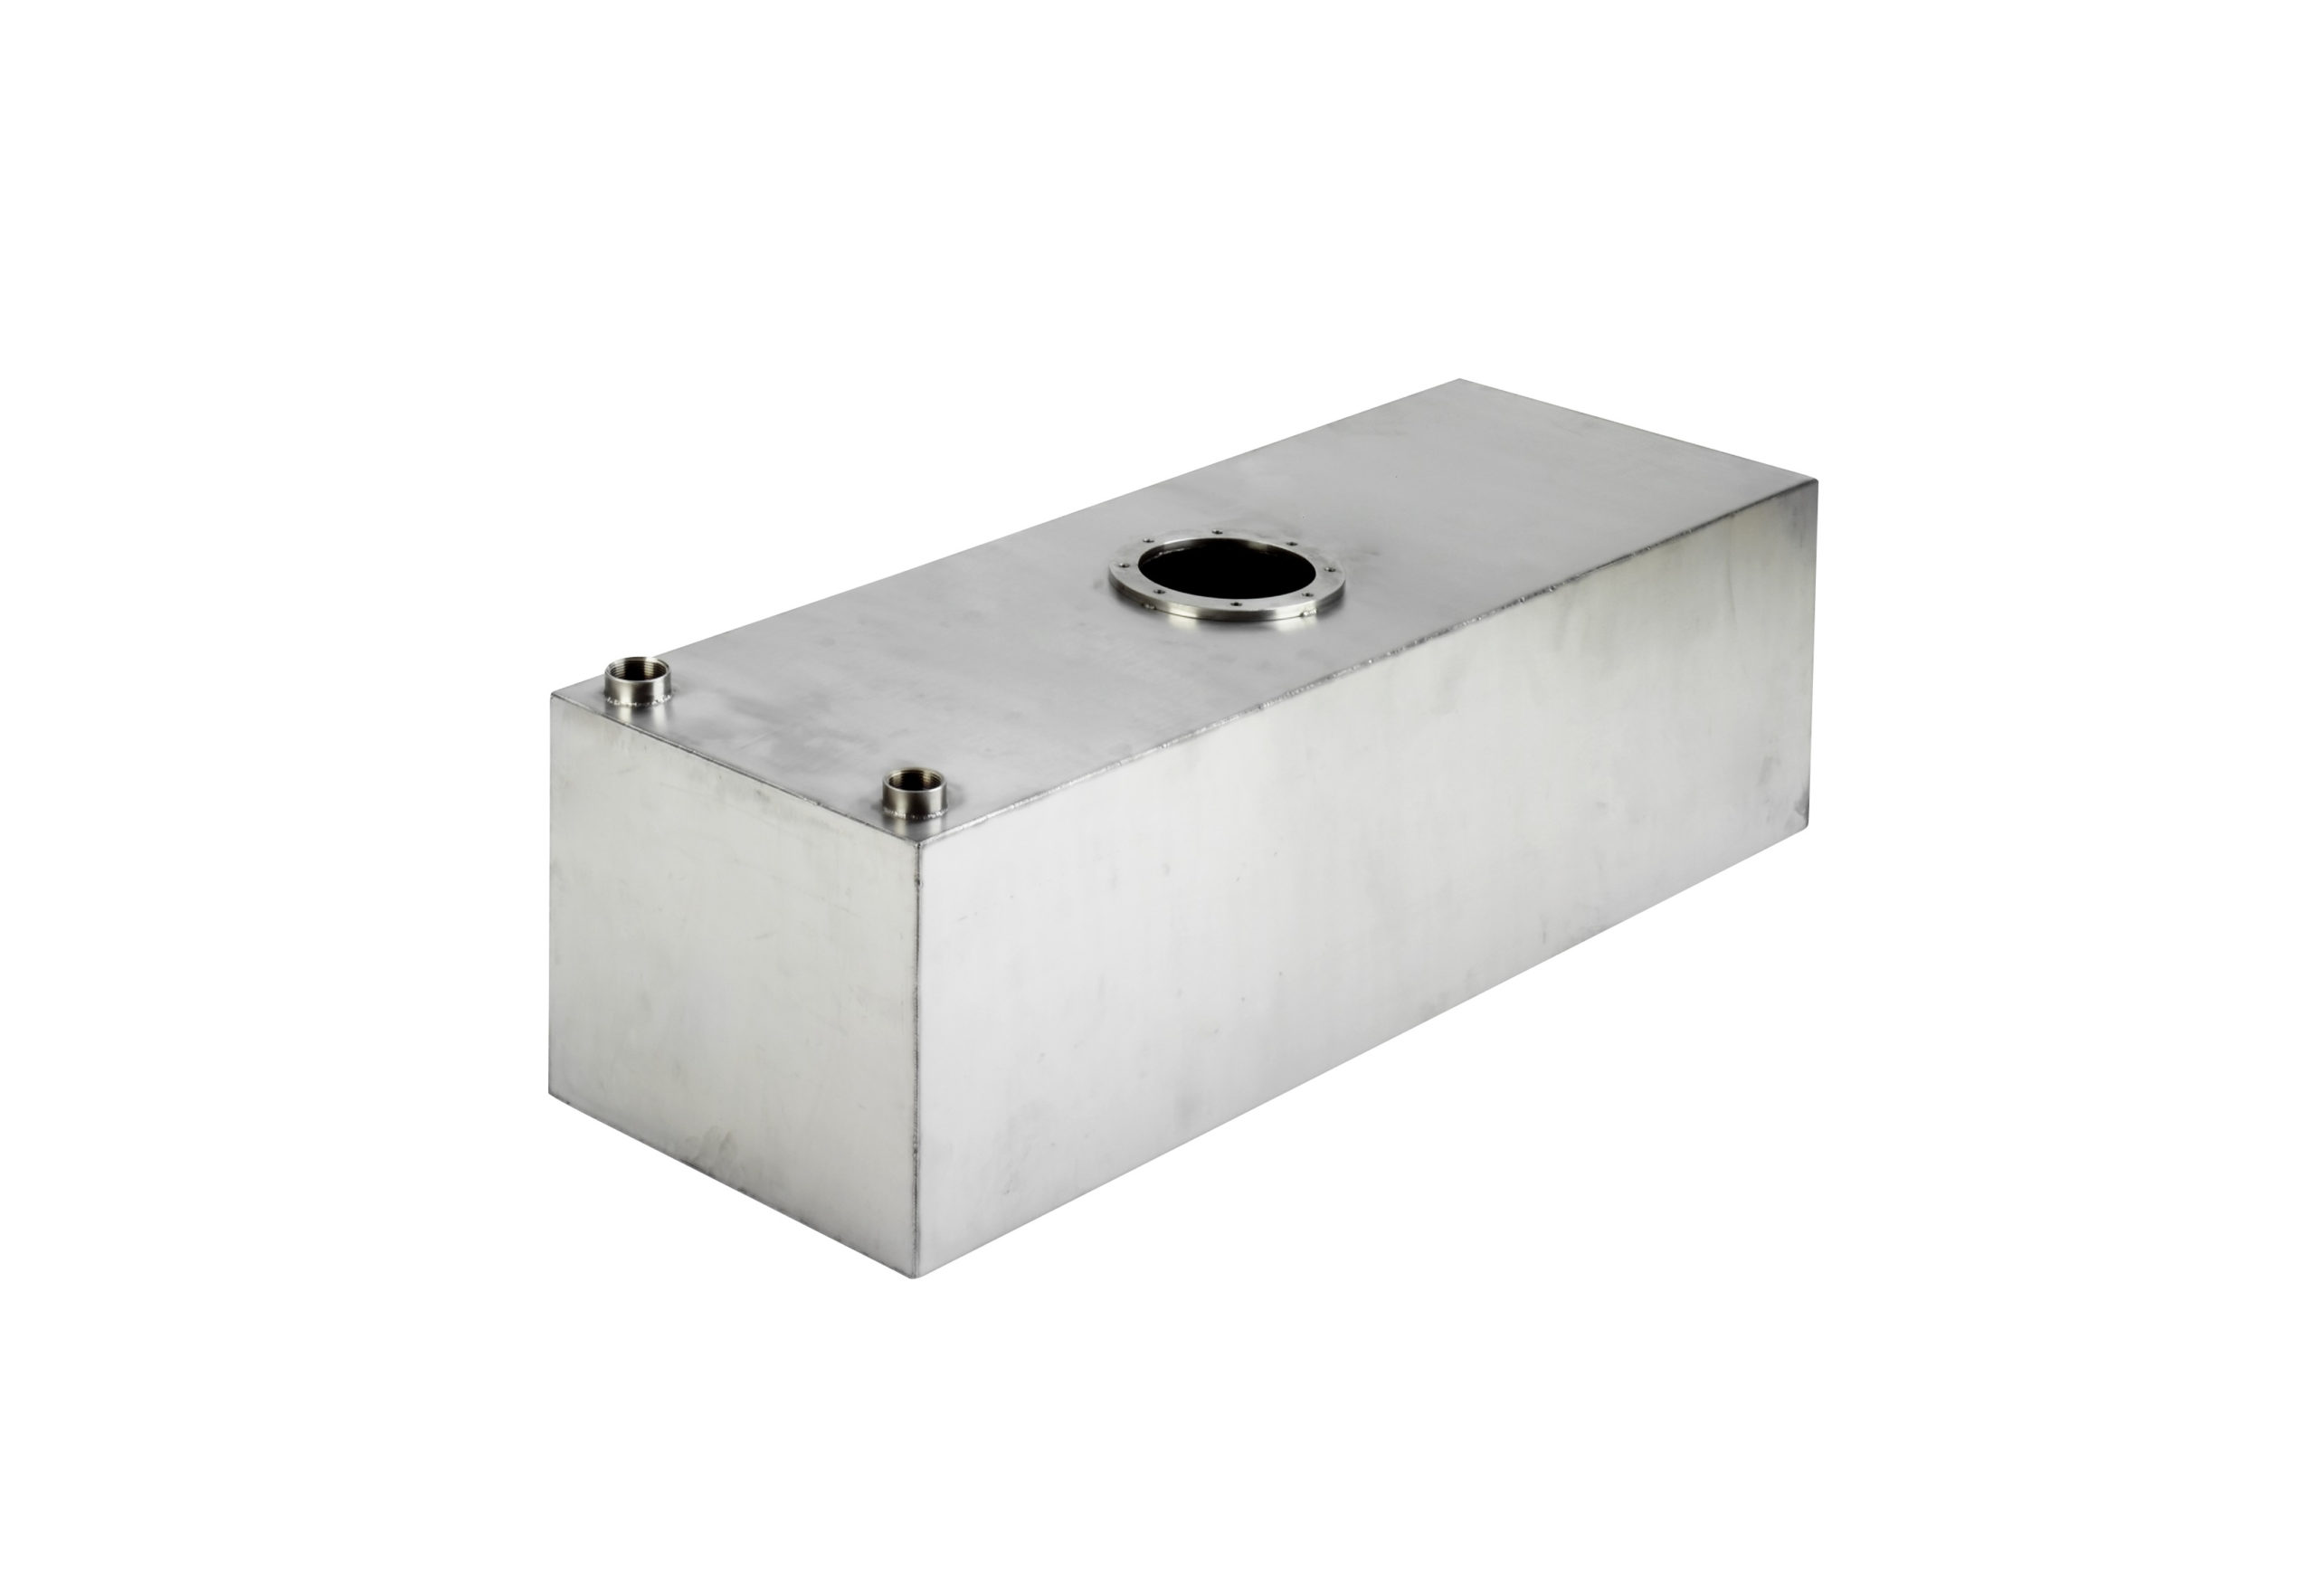 150 Litre Stainless Steel Tank - Drinking Water or Waste Water